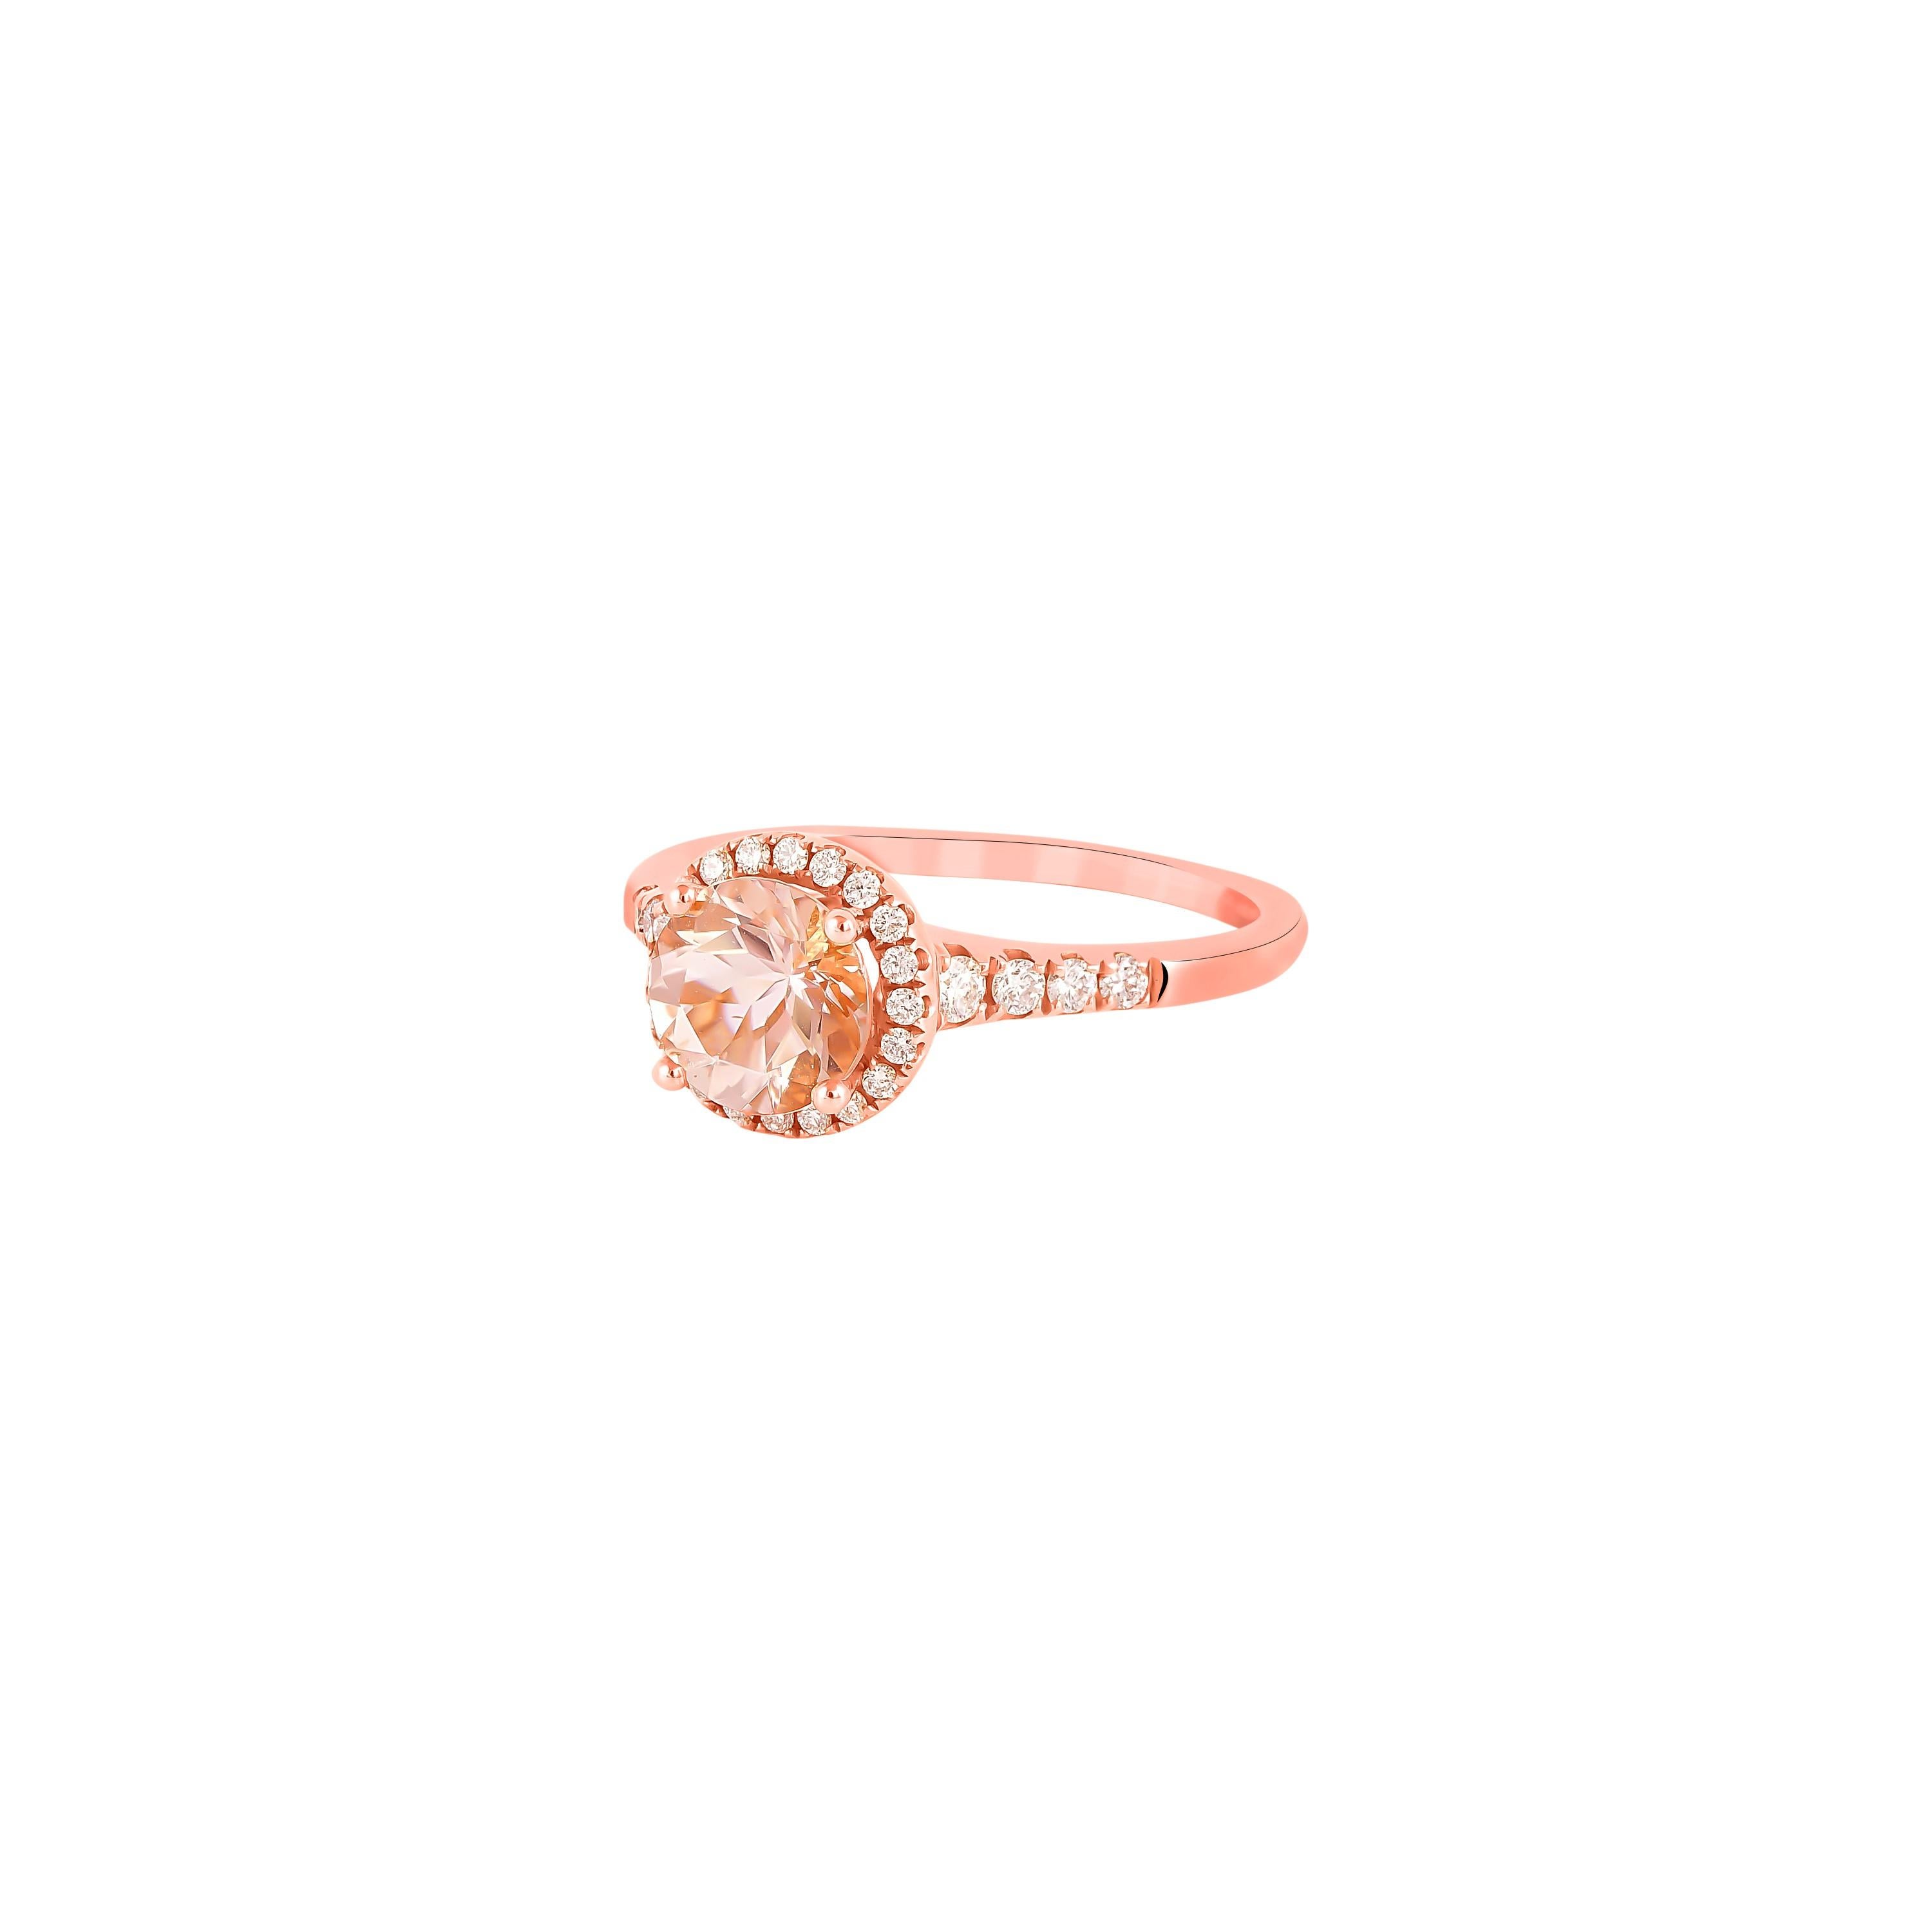 Contemporary 1.1 Carat Morganite and Diamond Ring in 18 Karat Rose Gold For Sale